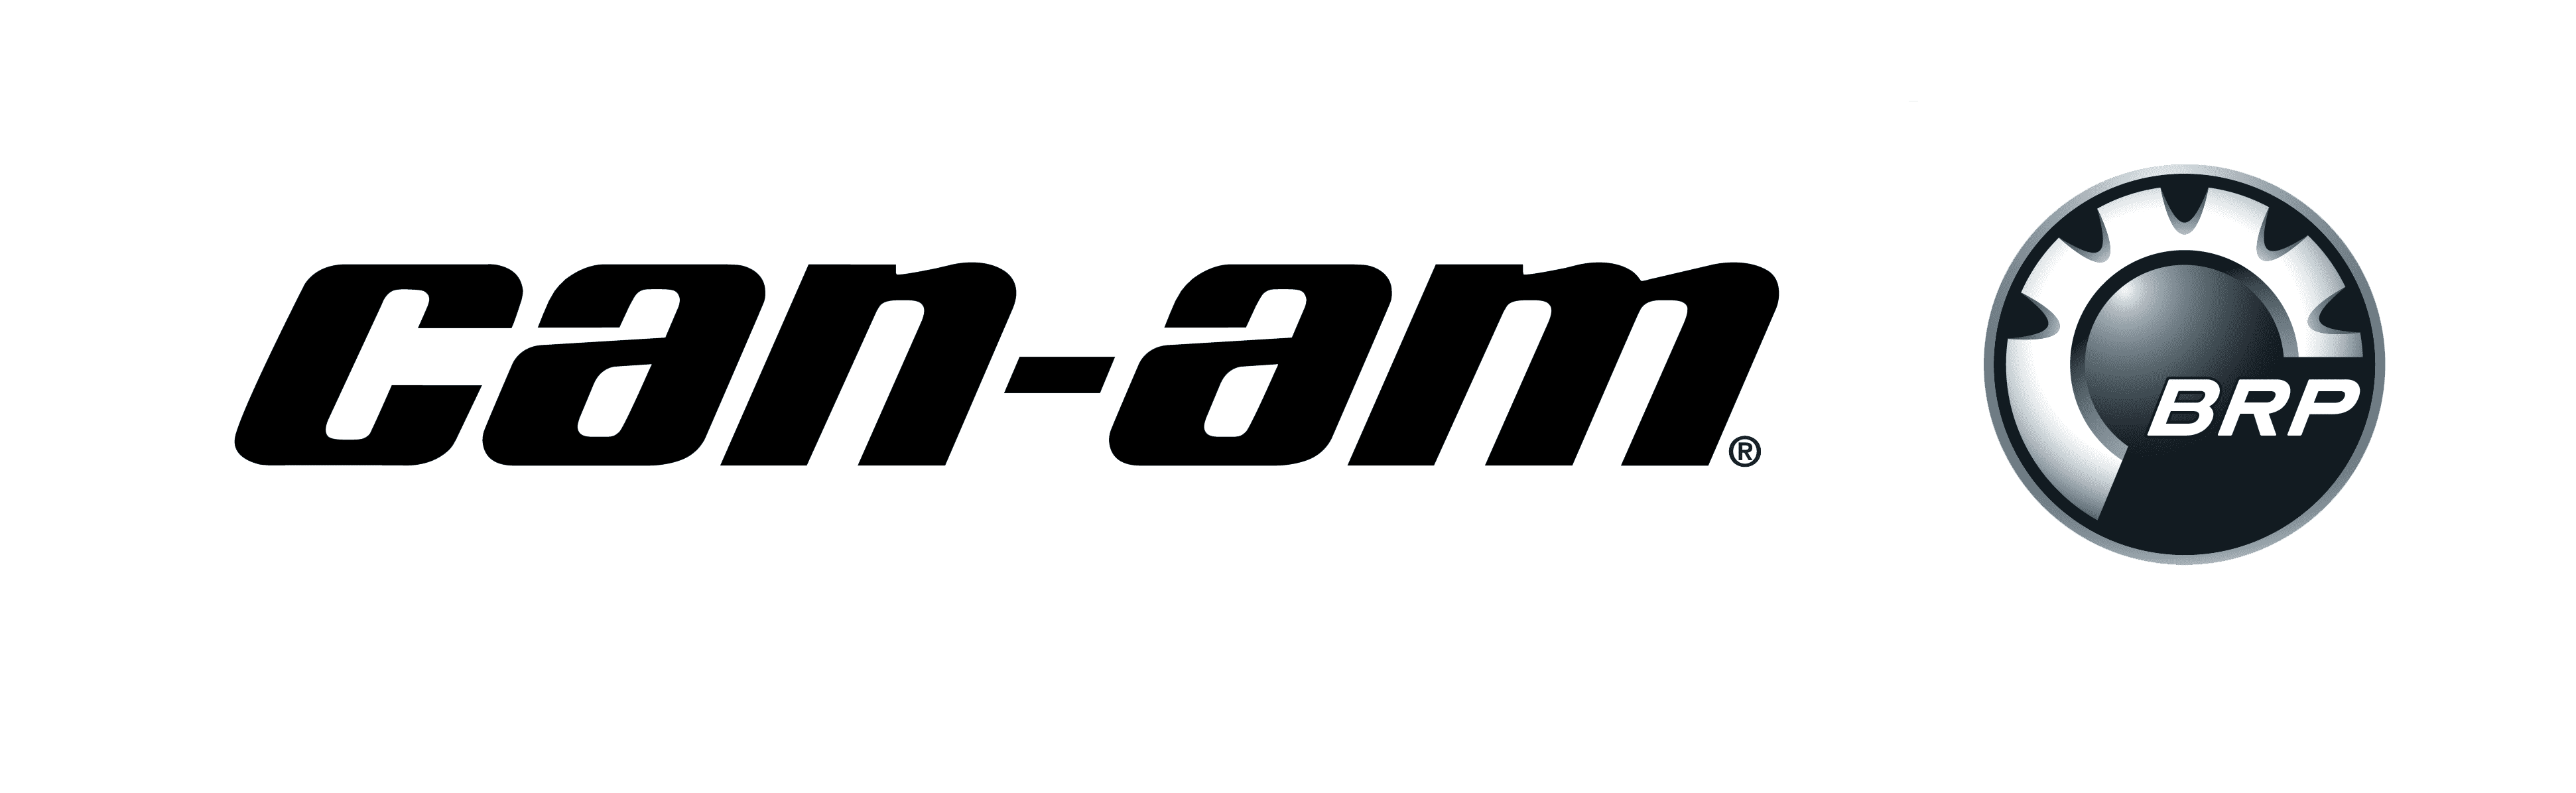 Can-am Bombardier